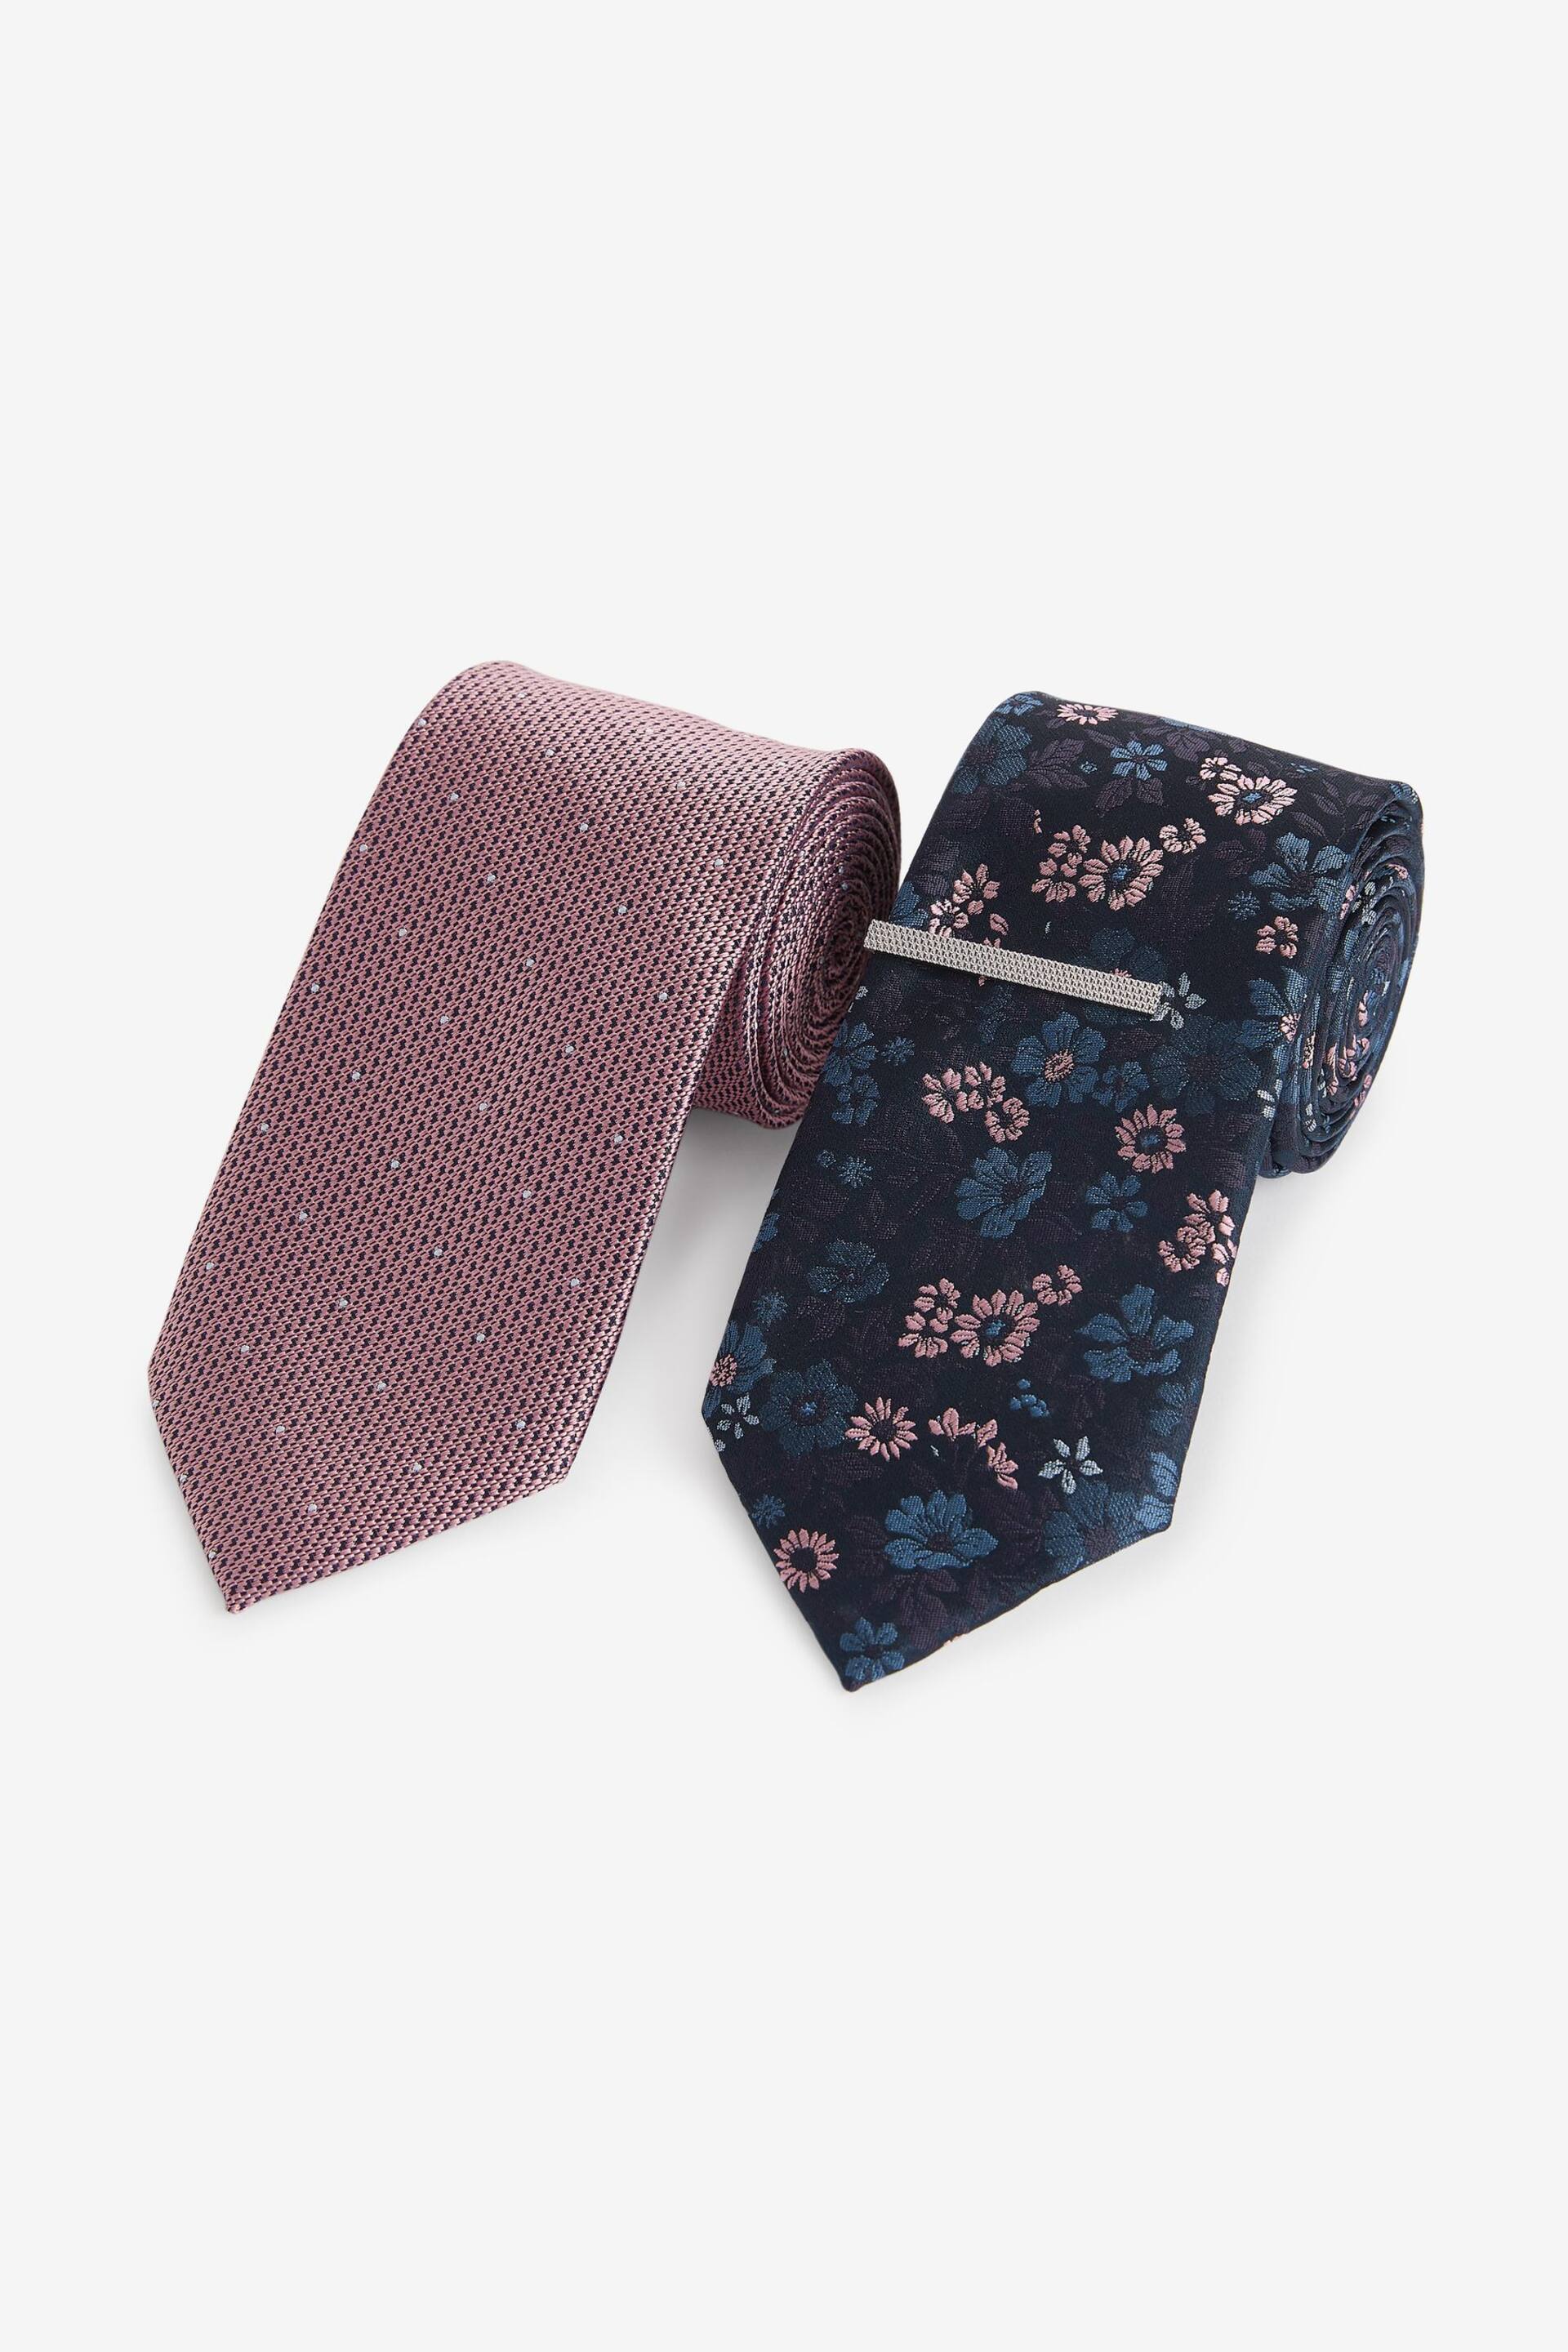 Pink Floral/Pink Polka Dot Textured Tie With Tie Clips 2 Pack - Image 1 of 3